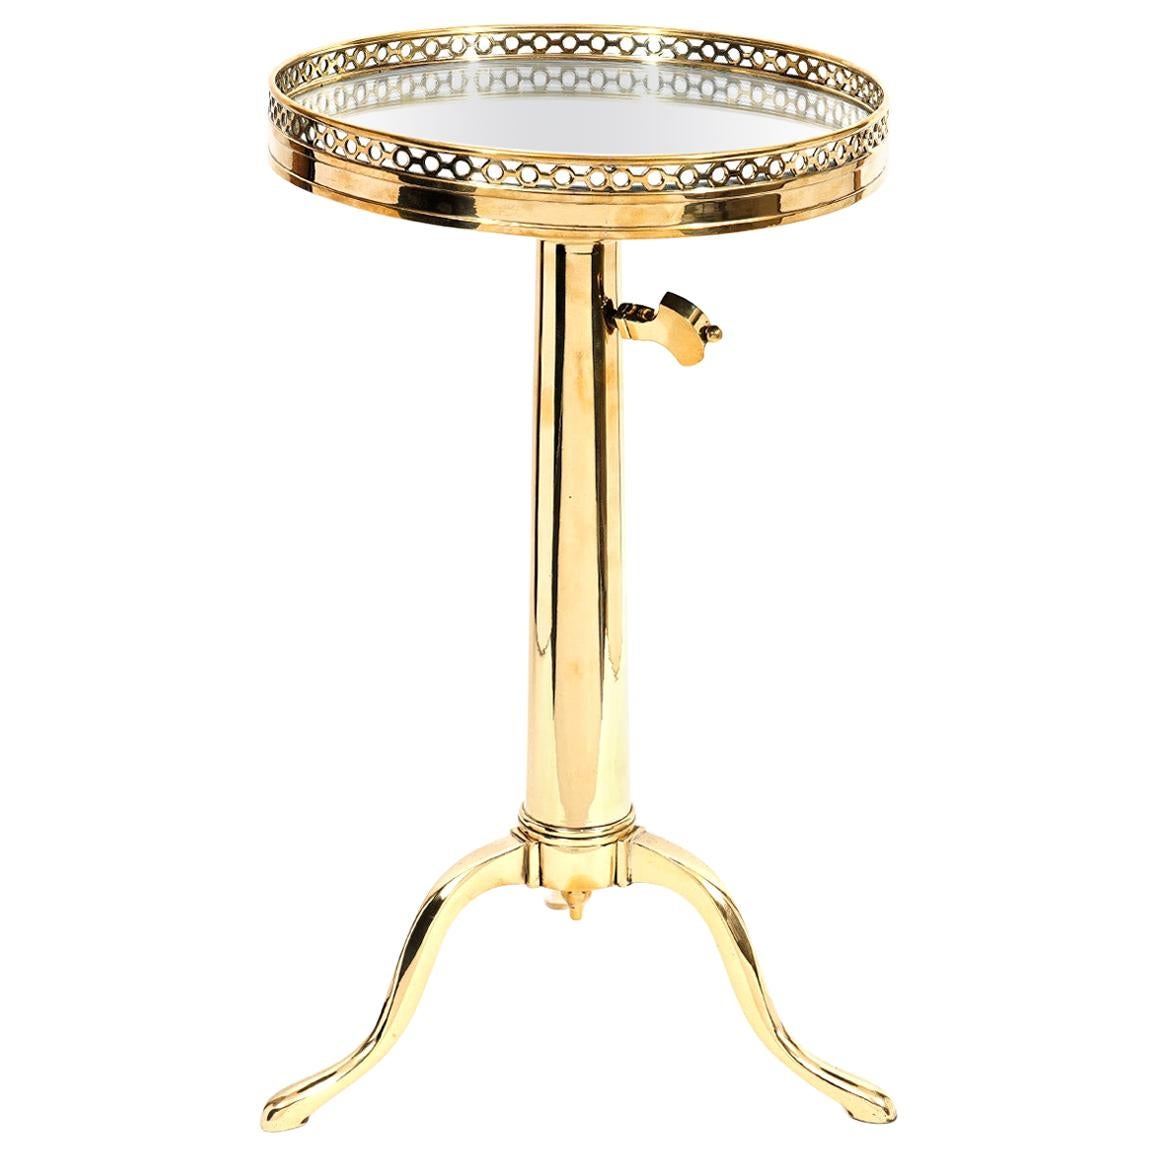 Telescoping Mirror Top Brass Occasional Tables by Maison Toulouse, Paris